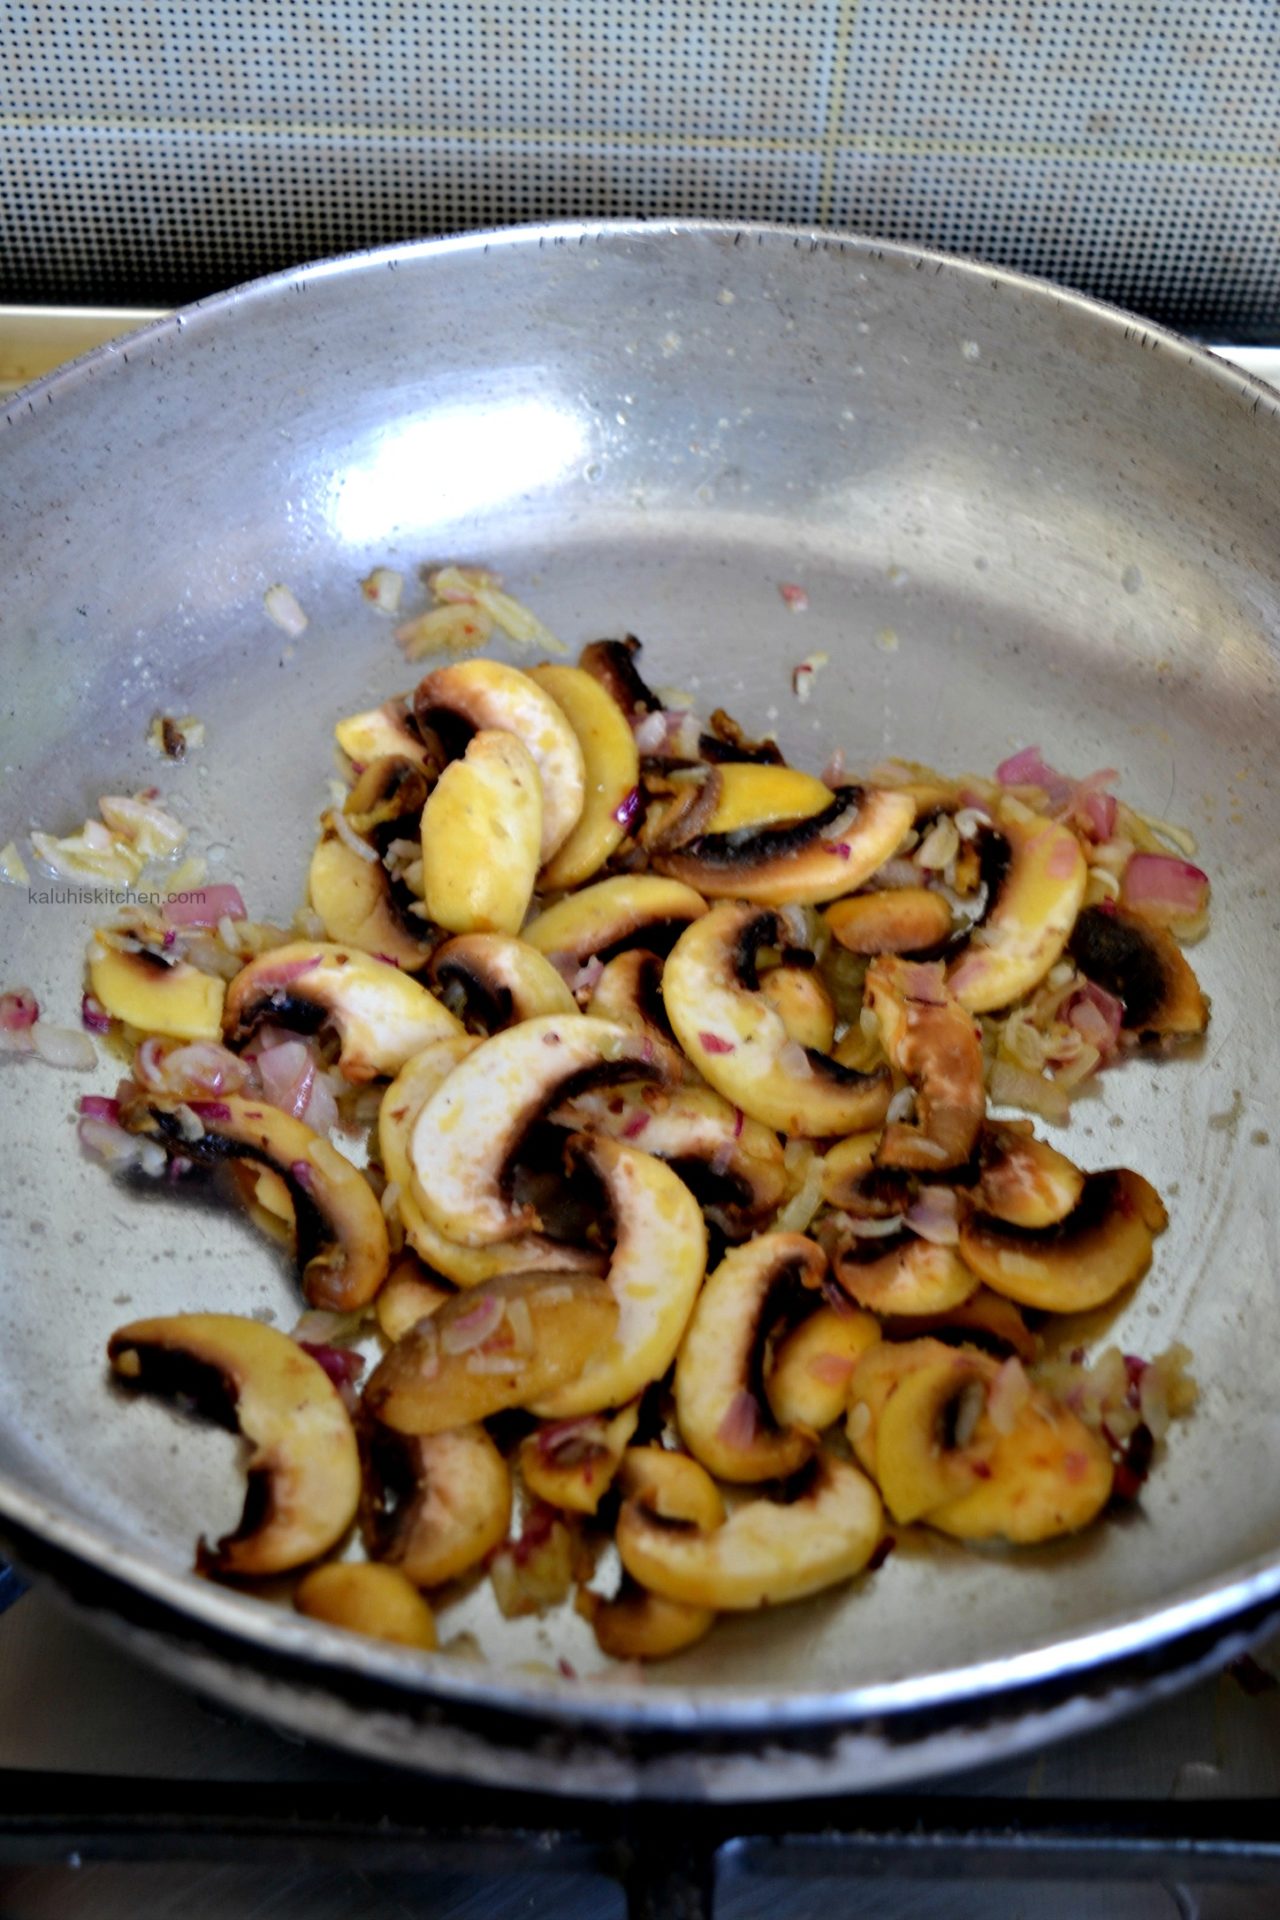 cook the button mushrooms together with the onions until they are just softened_kaluhiskitchen.com